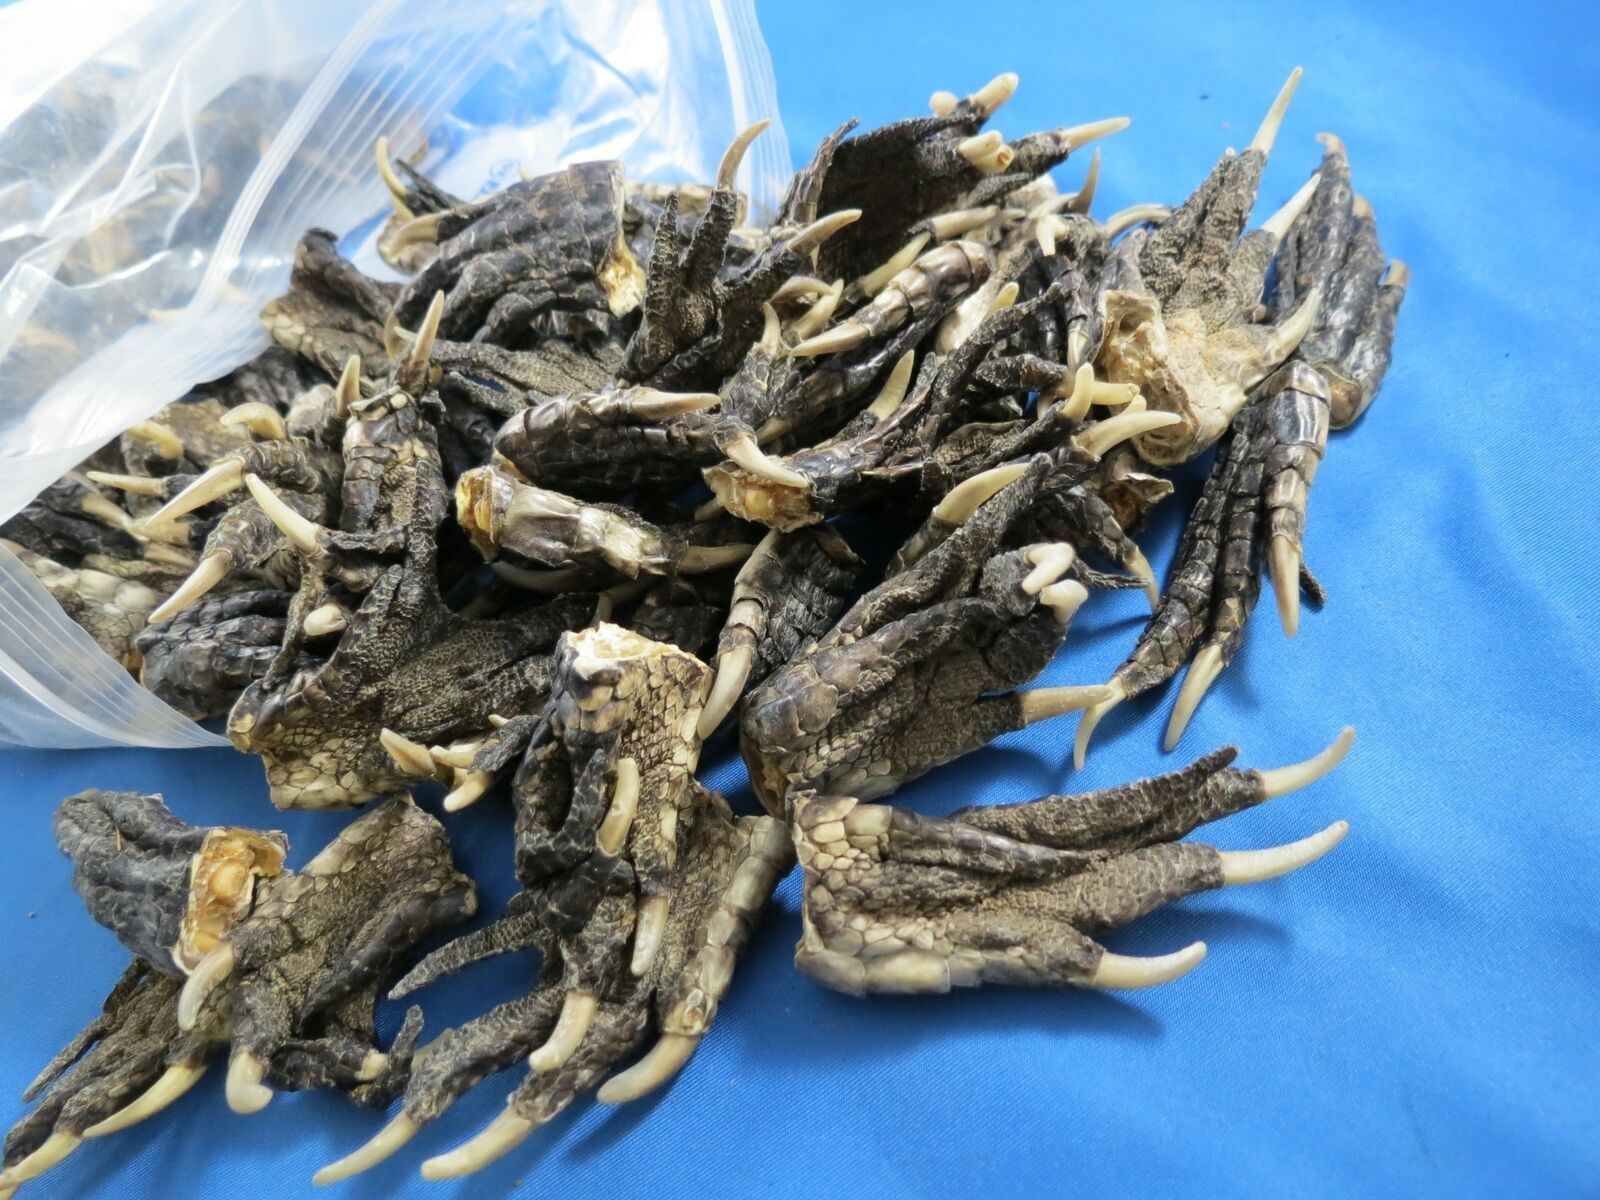 WHOLESALE LOT OF 100 Uncut SMALL FLORIDA GATOR ALLIGATOR FEET REAL CLAWS crafts